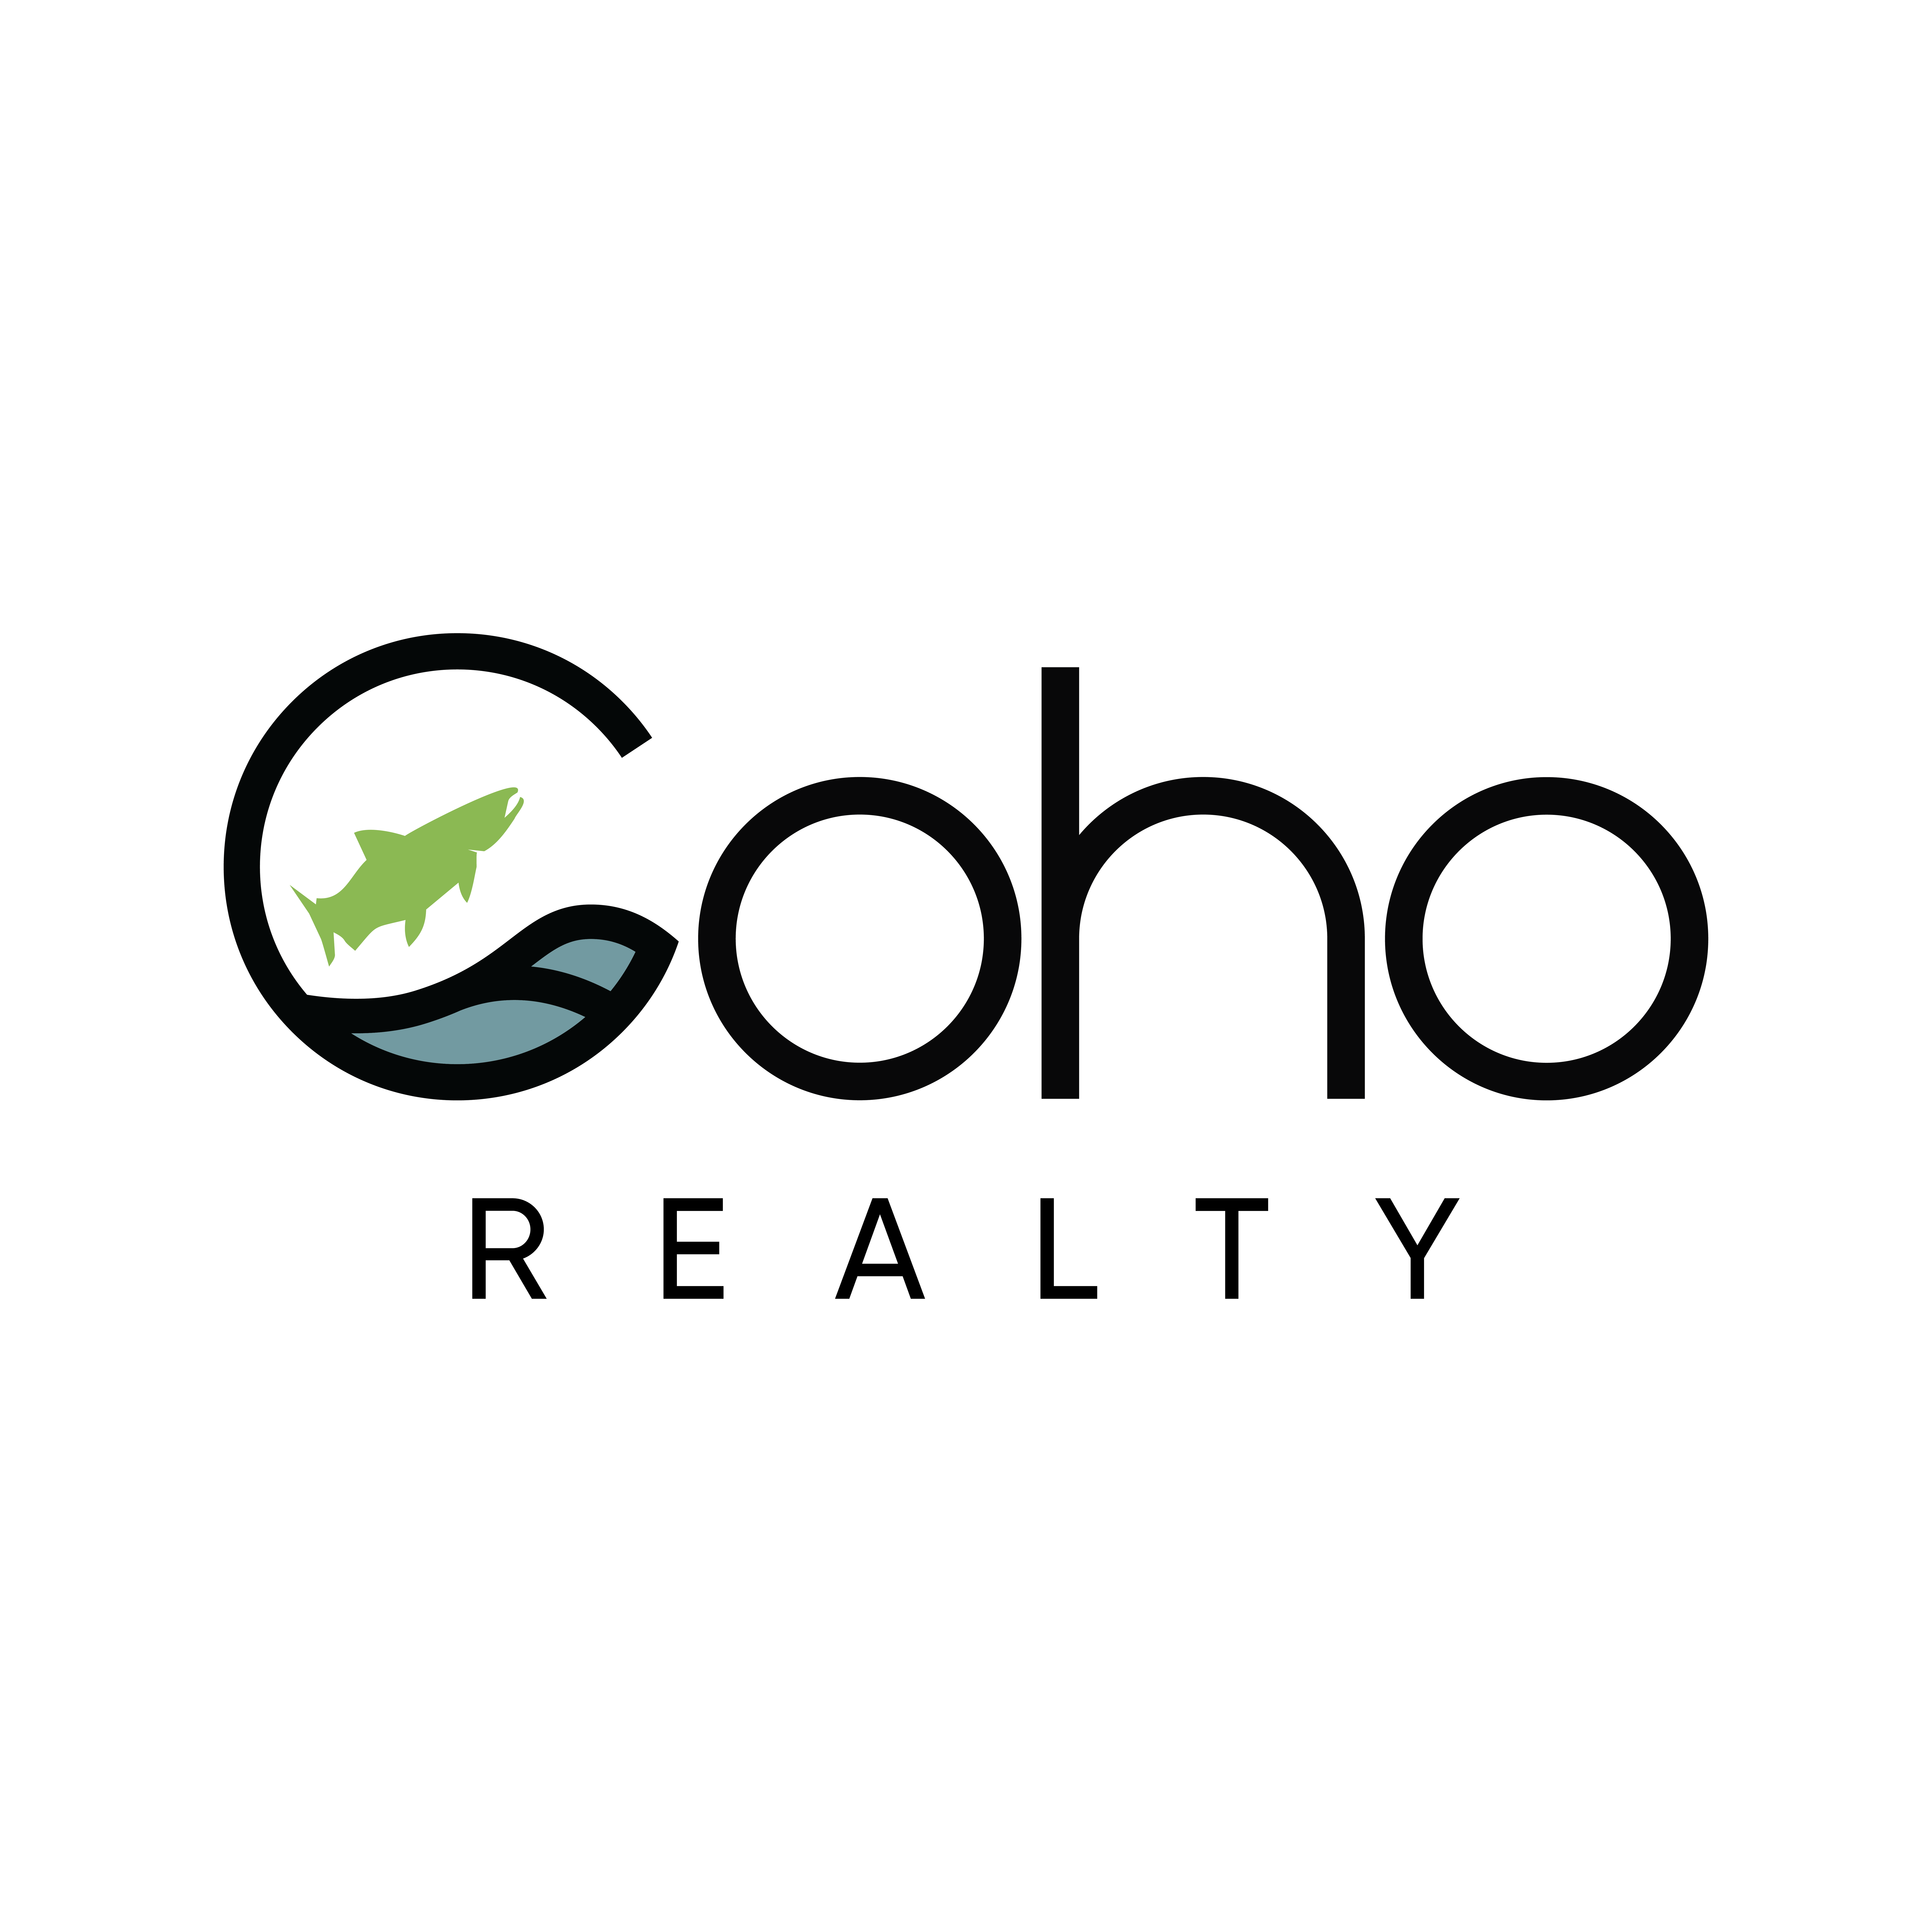 Coho Realty Combo Mark-01 (8).png